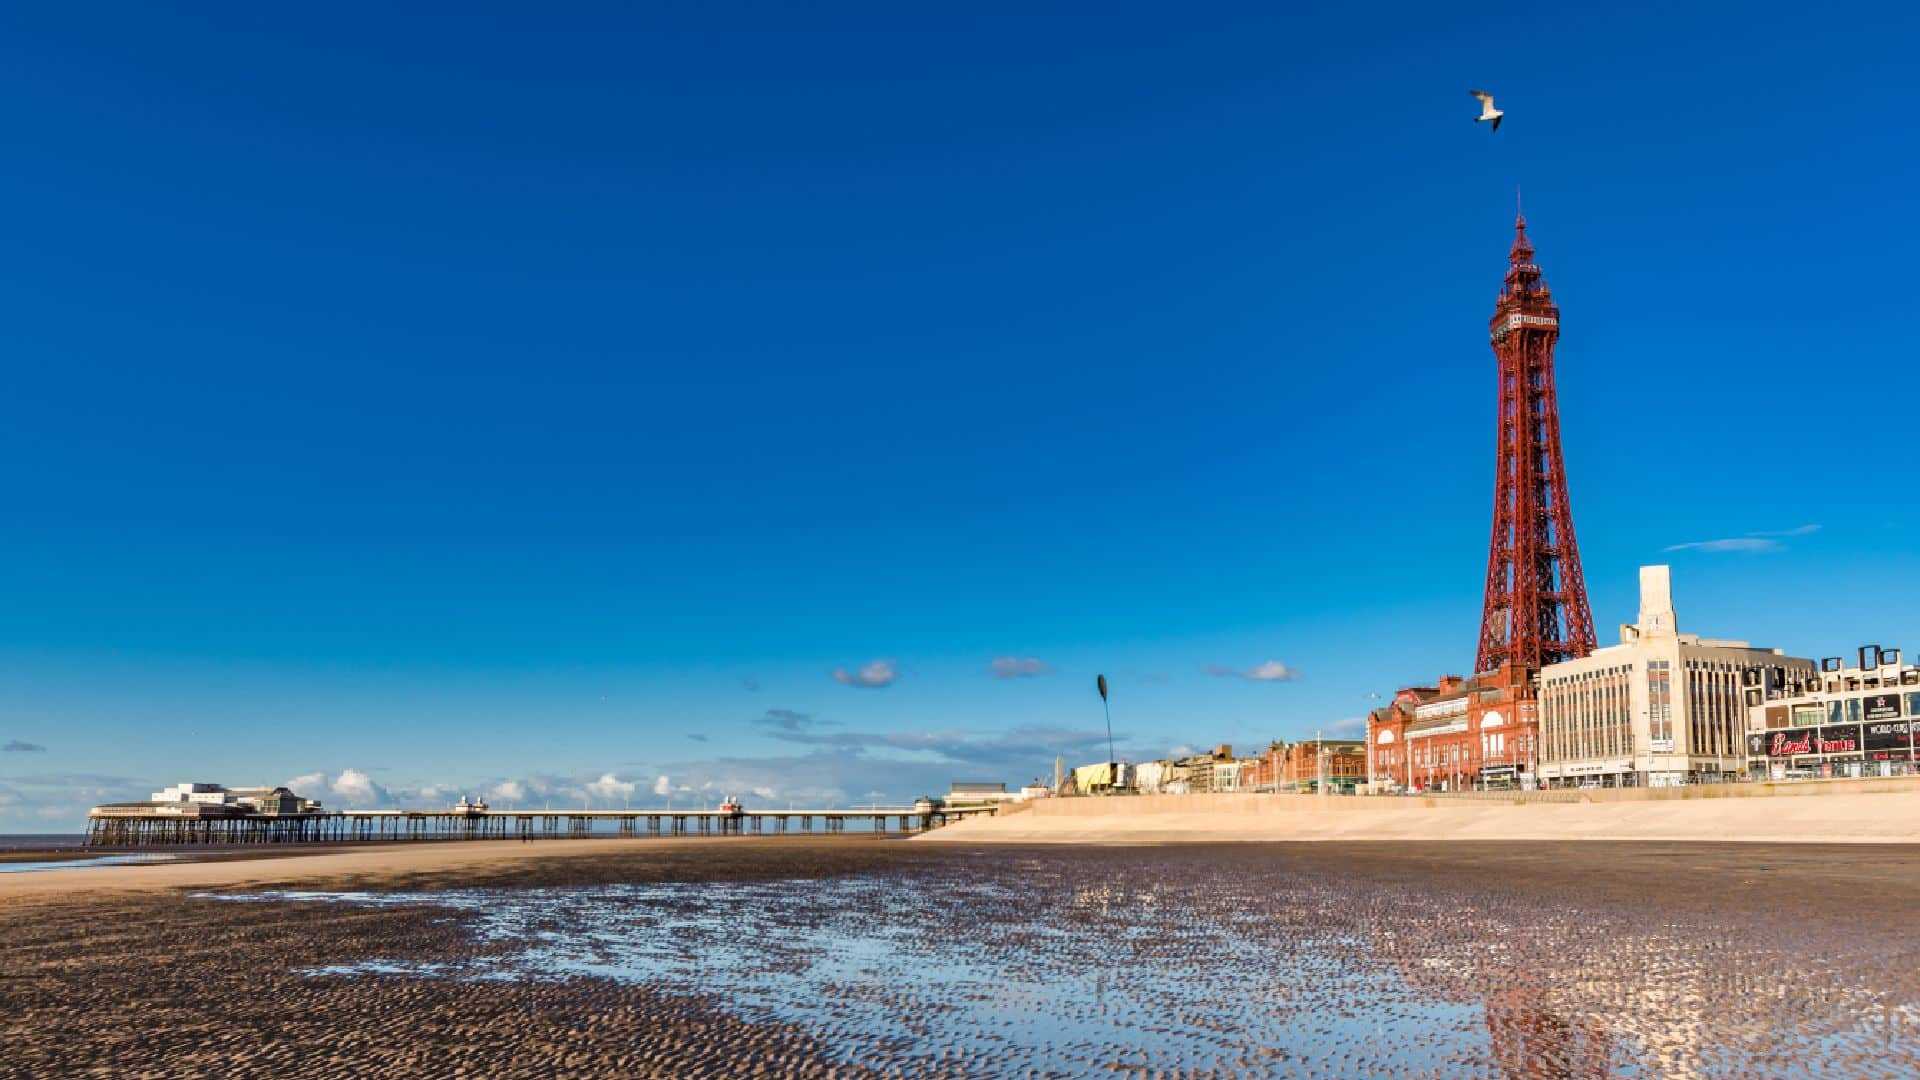 Blackpool beach with blackpool tower in the background